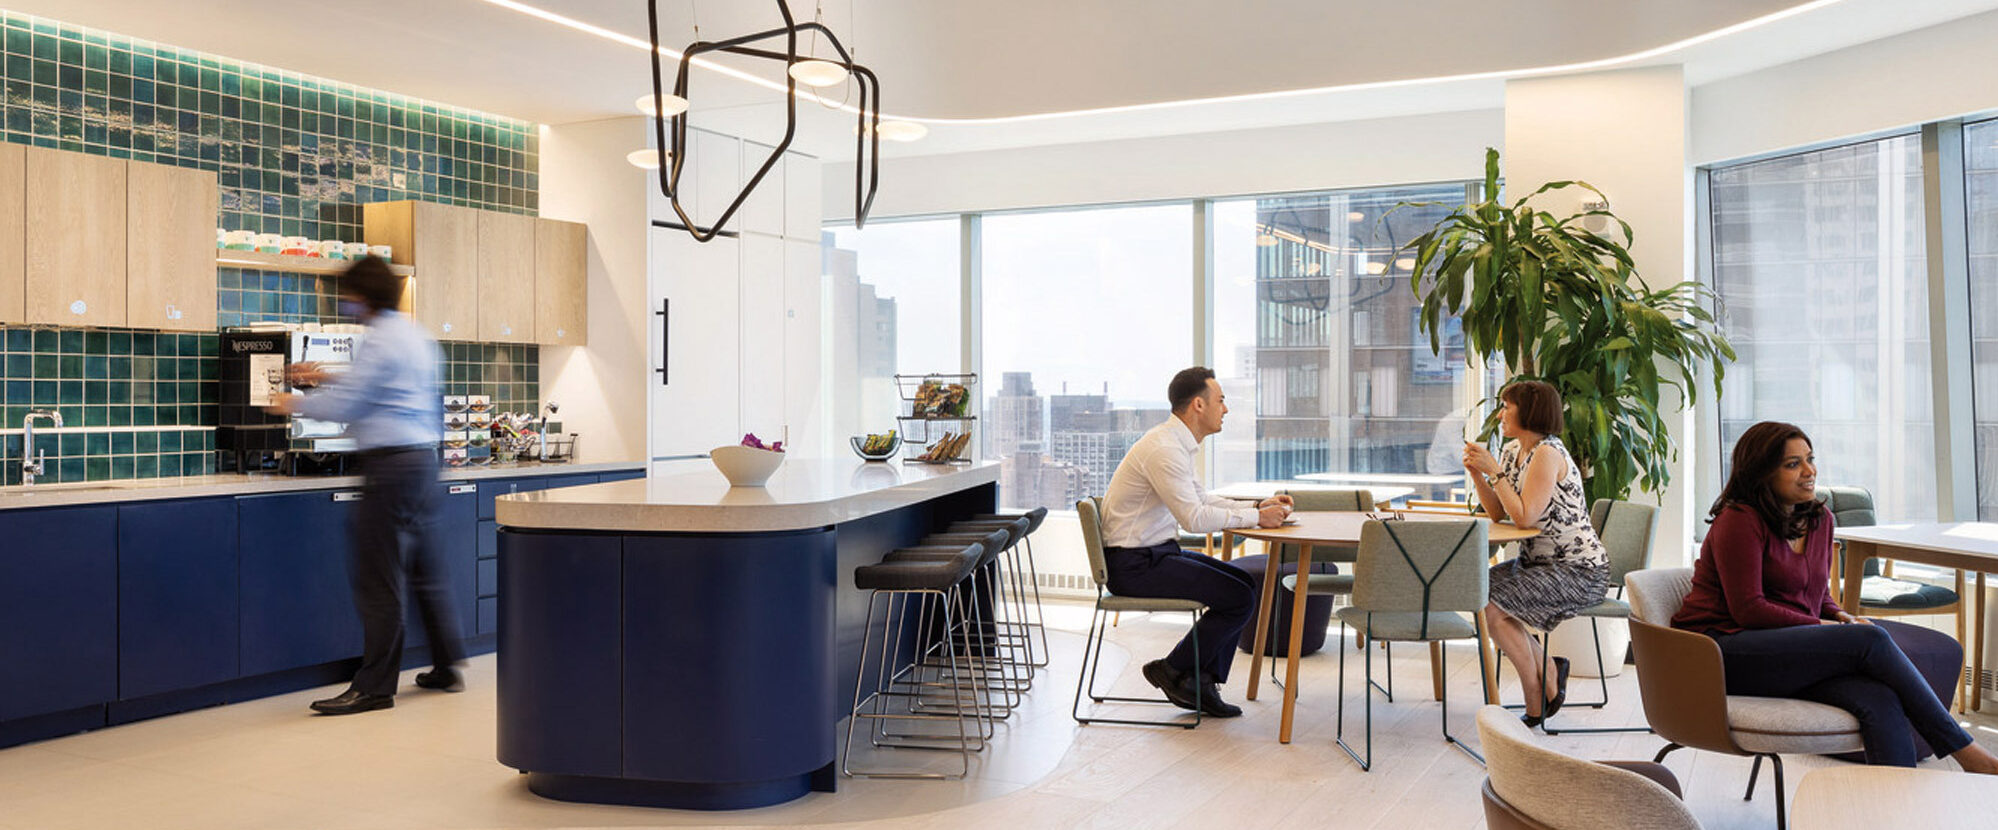 Modern office break room with exposed ceiling, featuring a central island with navy blue cabinetry and bar seating, surrounded by a wood-accent kitchen area, pendant lighting, and employees engaged in casual conversation.